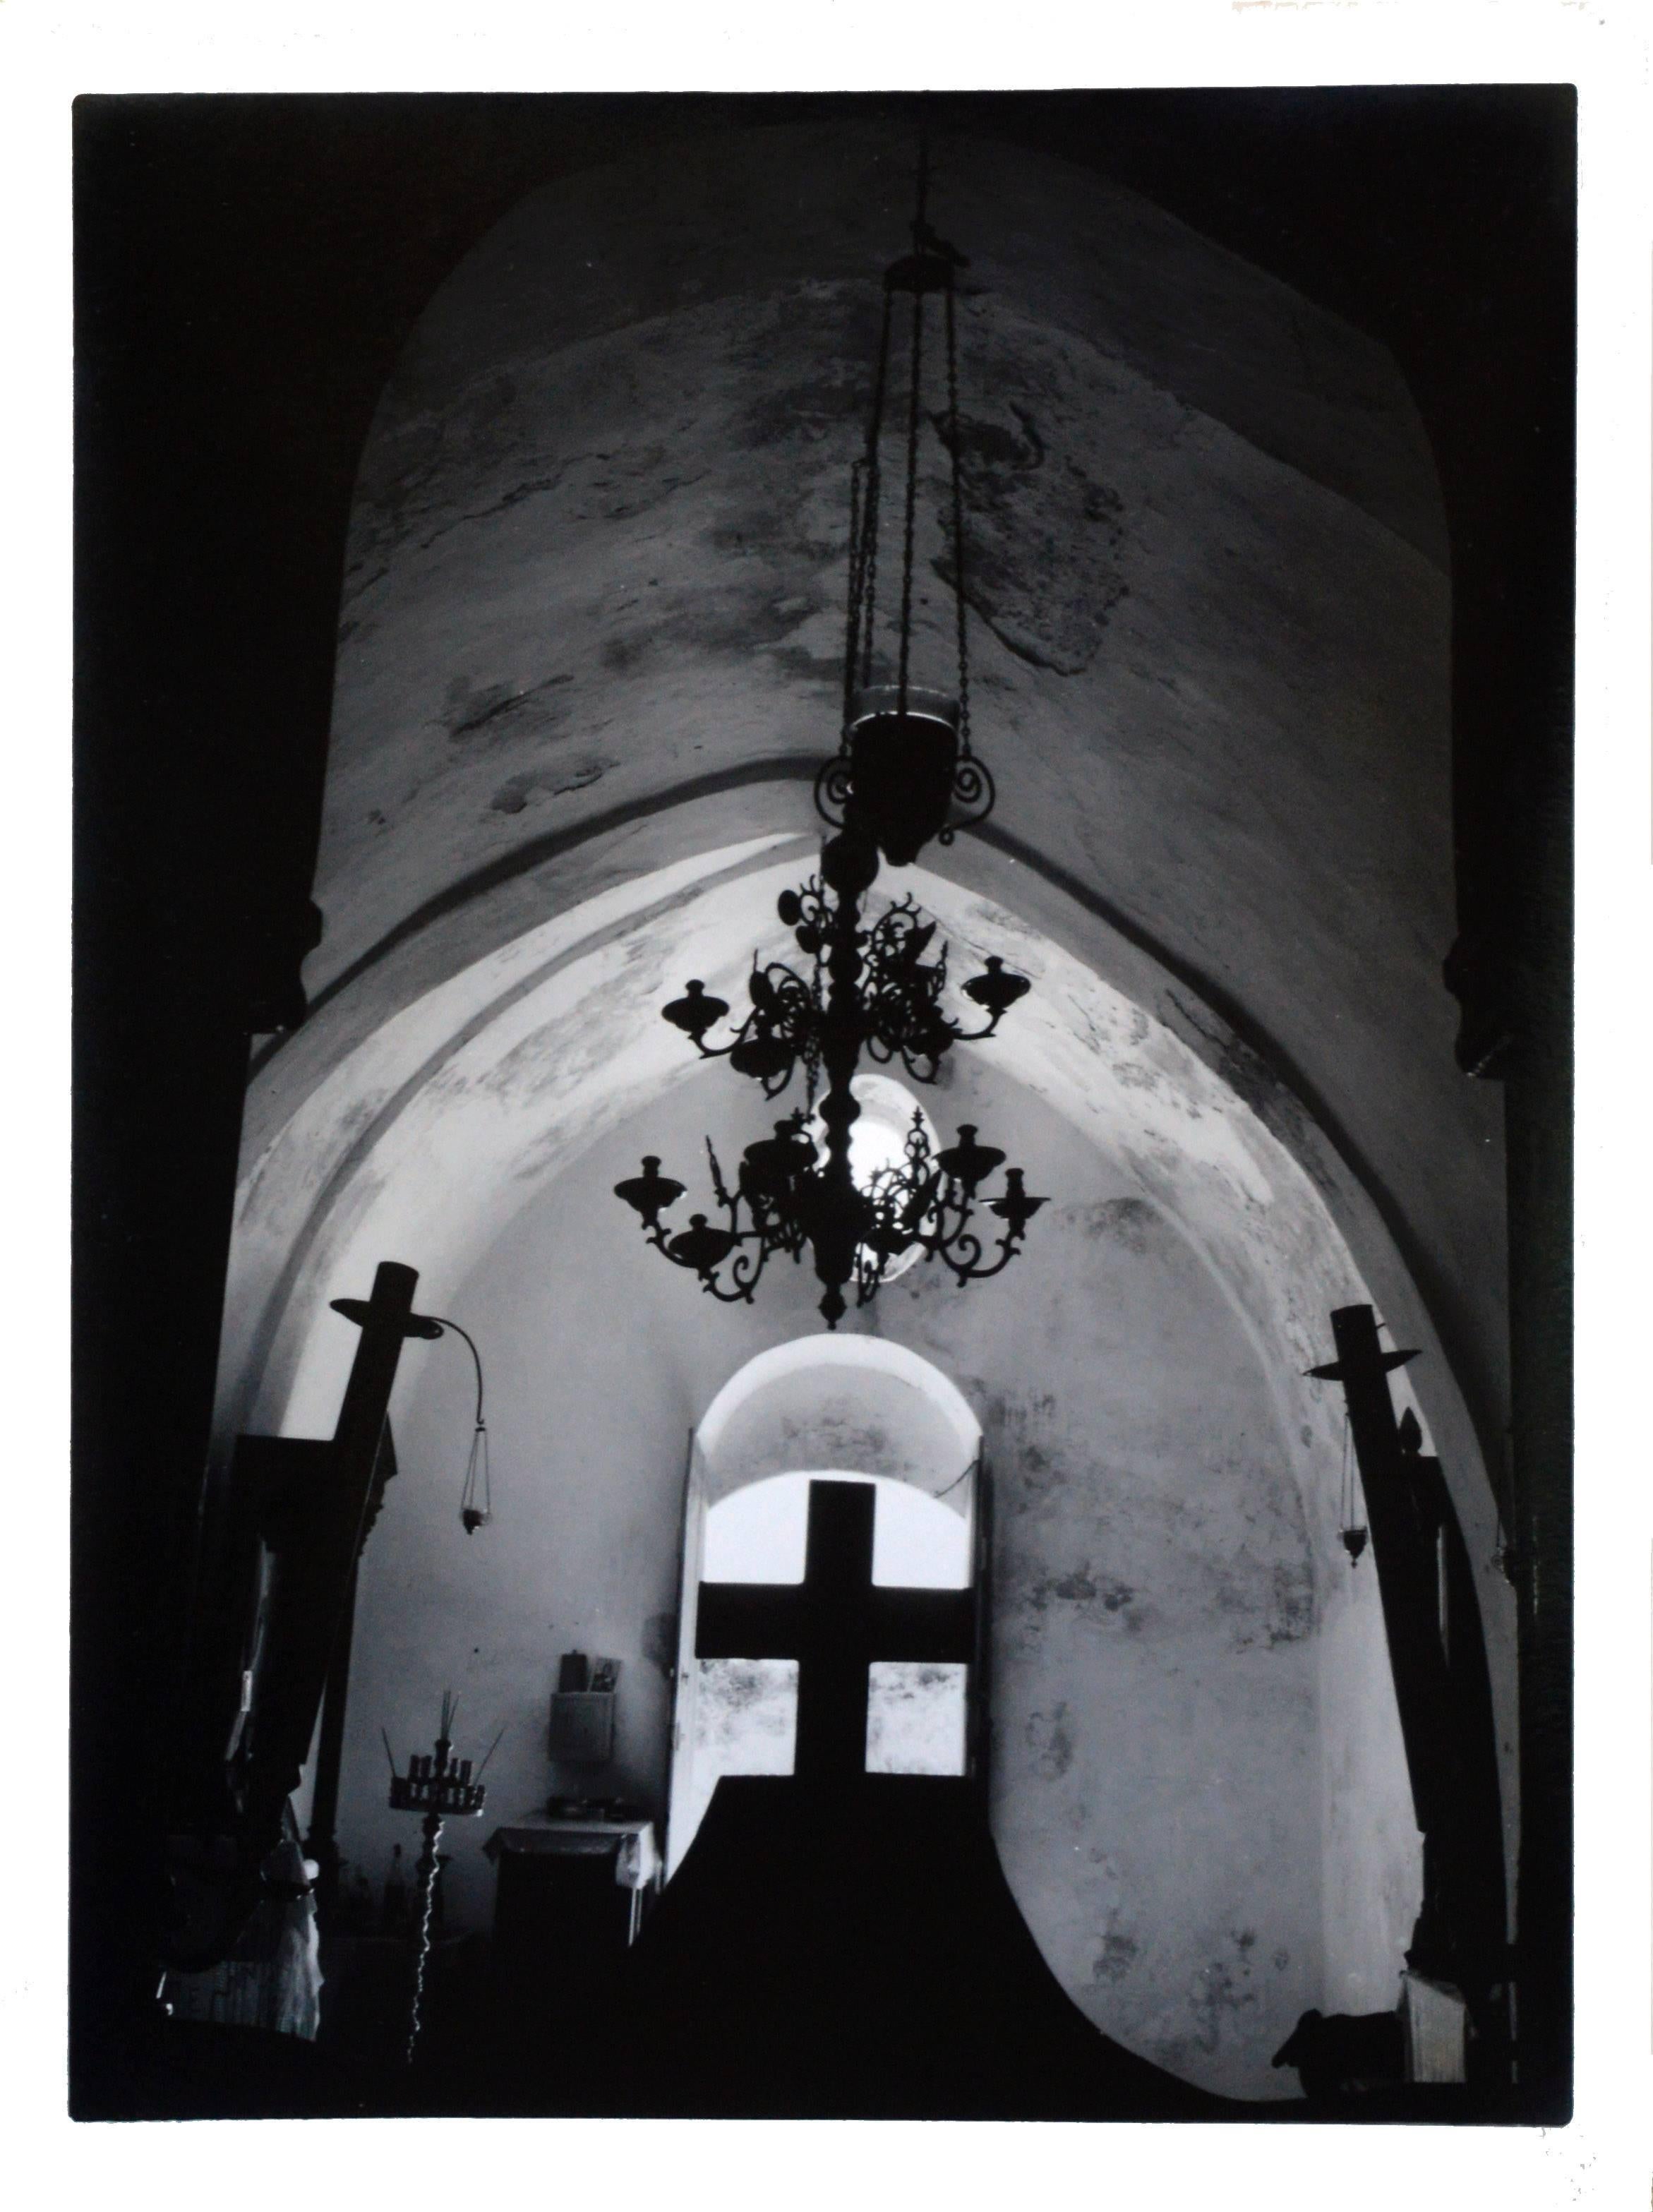 Cretian Chapel - Photograph by William Giles